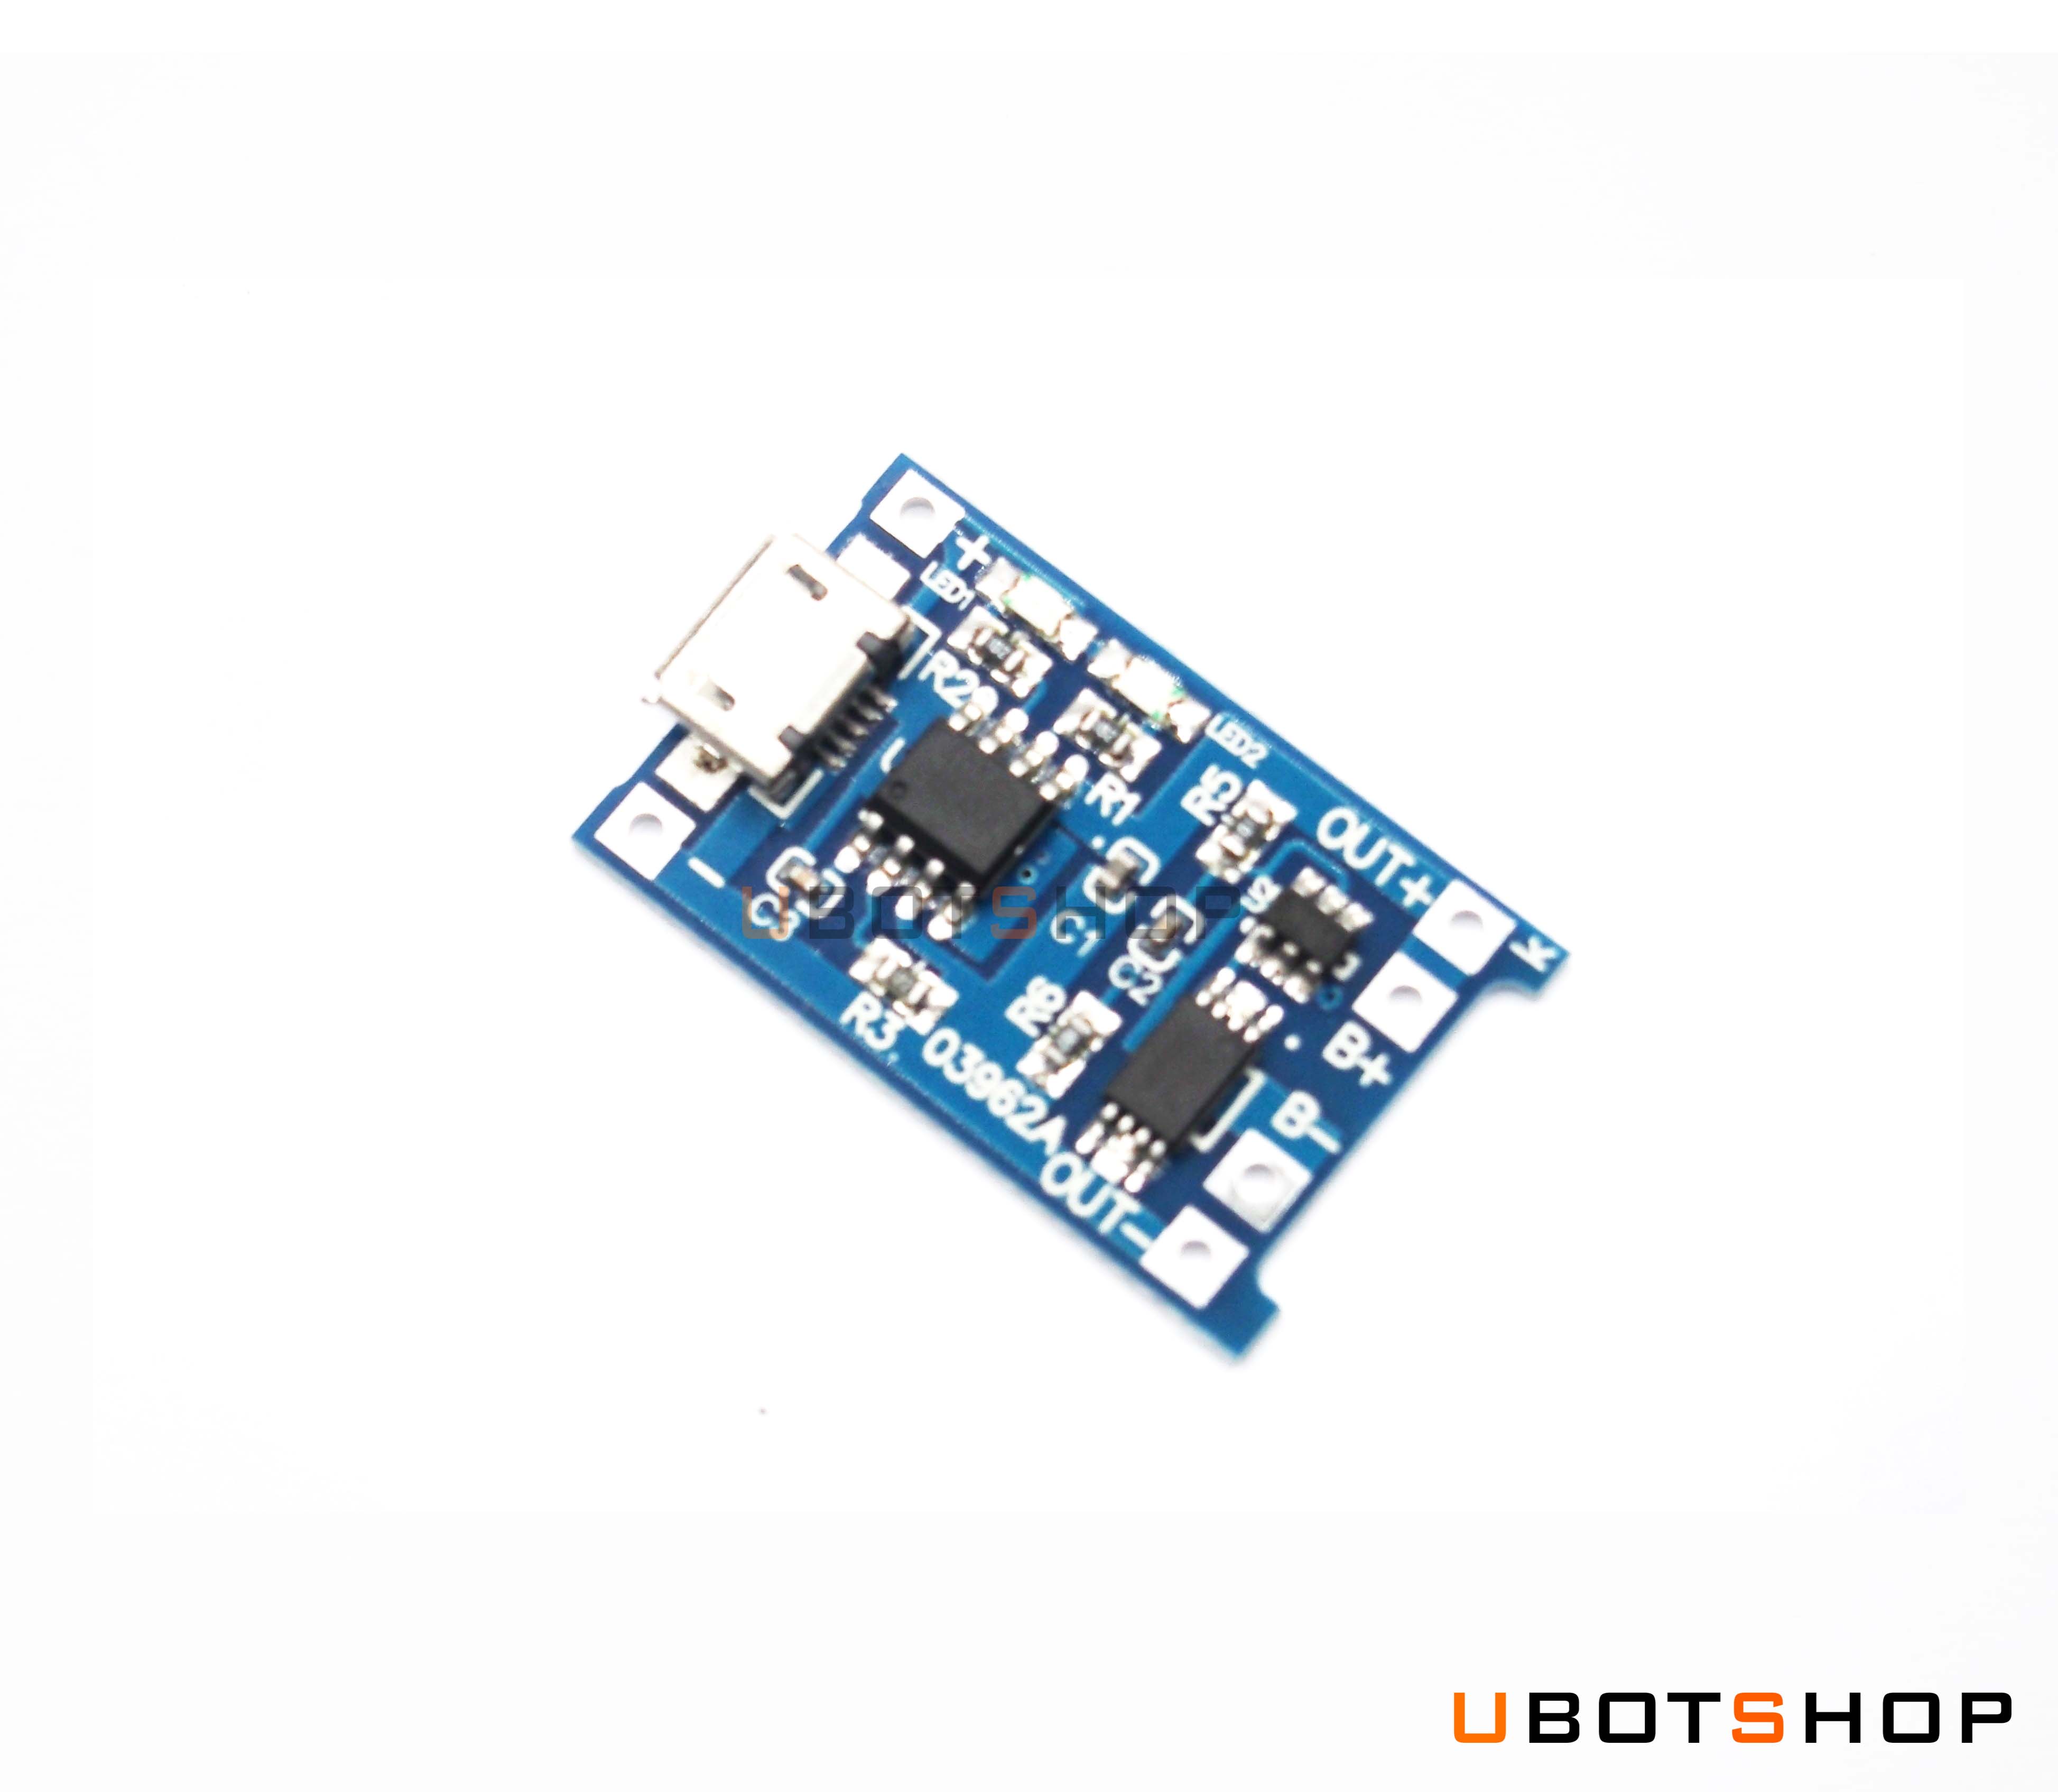 18650 Lithium Battery Charger Module (PB0004)